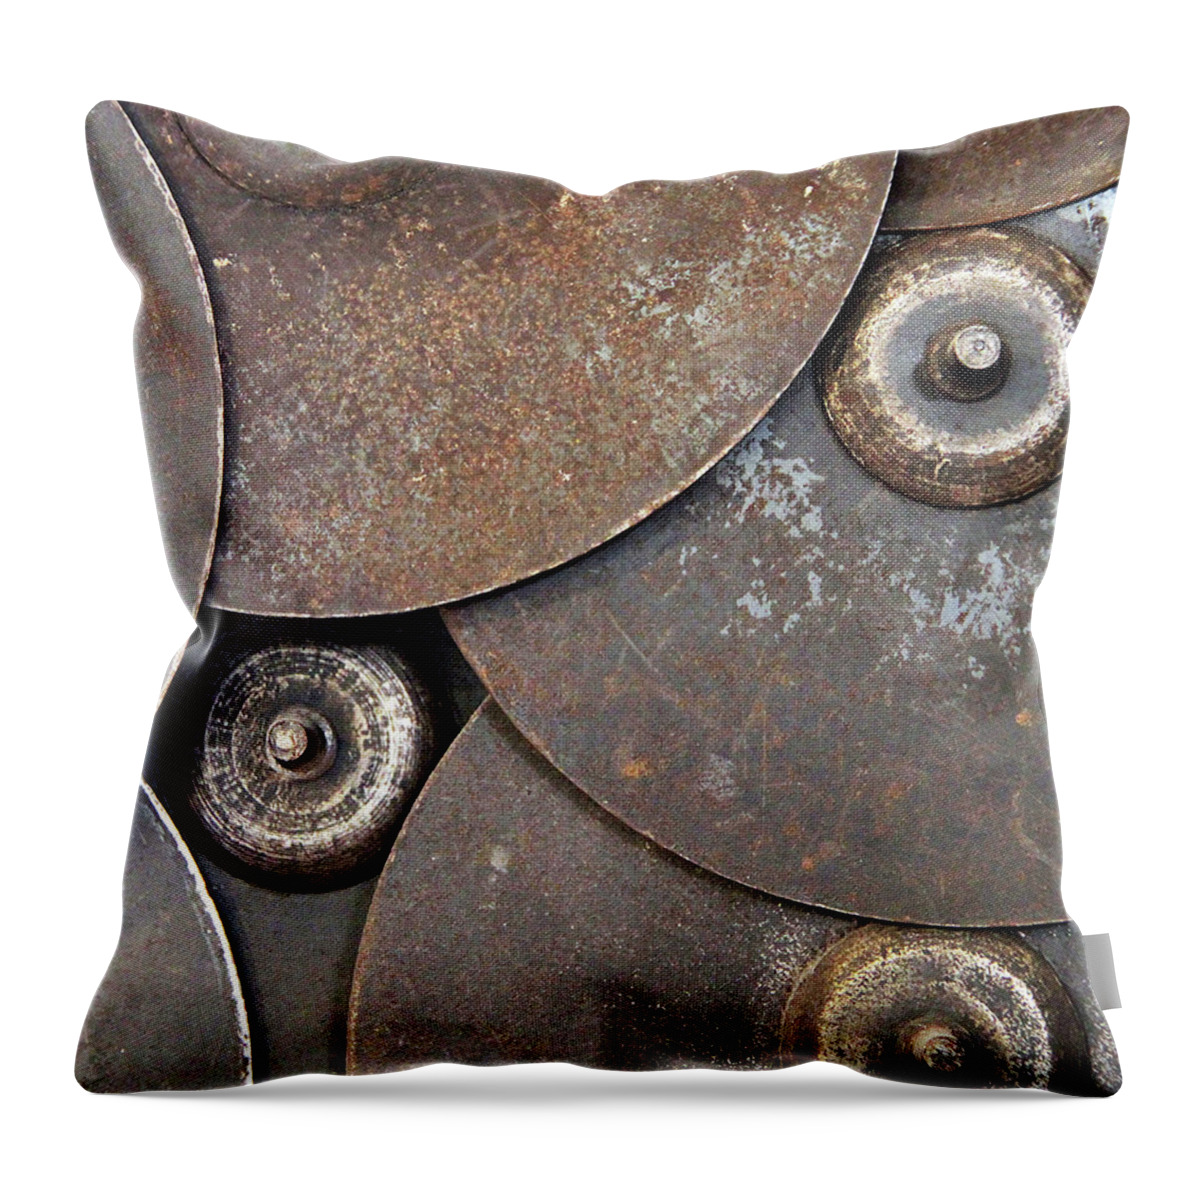 Work Tool Throw Pillow featuring the photograph Industrial Overlap by Jan Dolan (foto.phrend)